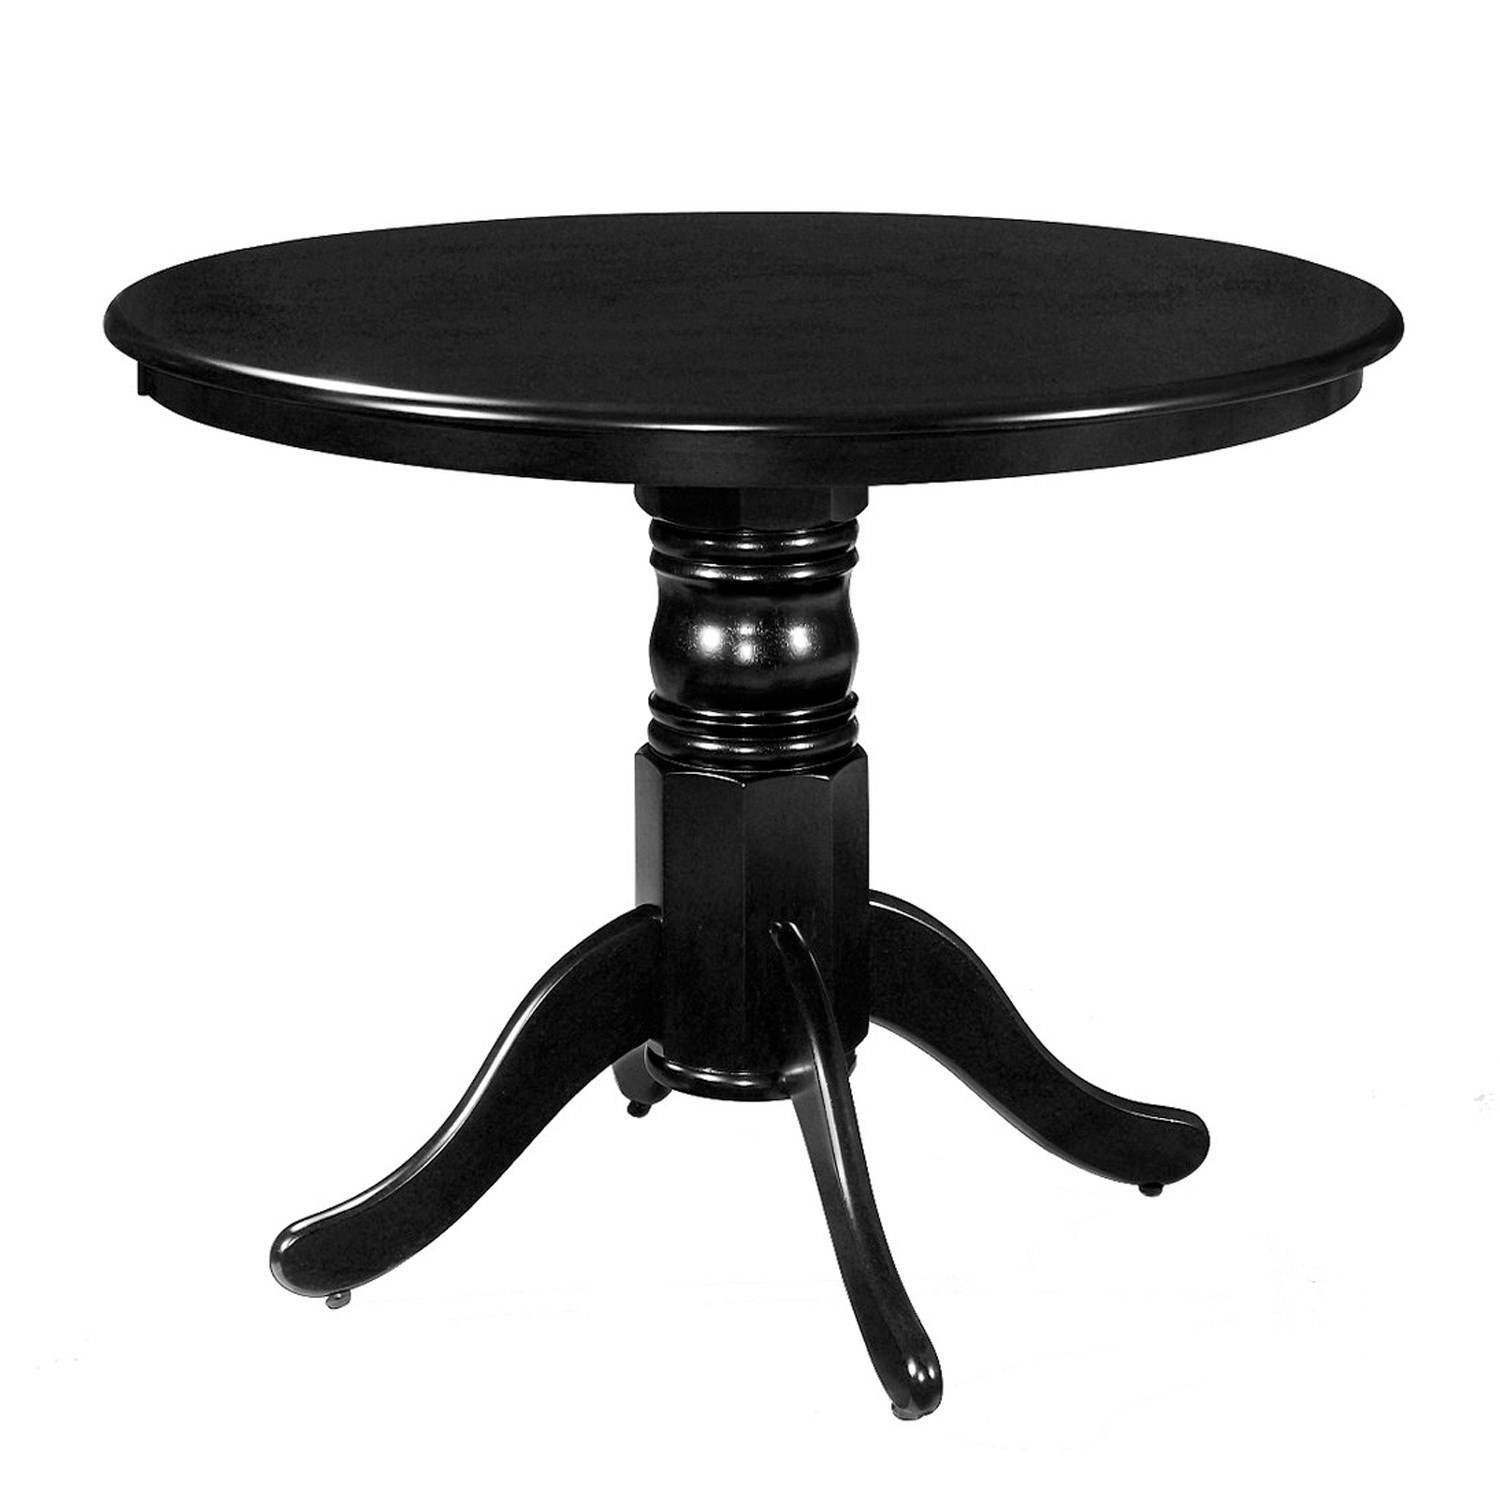 Small Round Dining Table In Black With 4 Velvet Chairs In Grey Rhode Island Kaylee Buyitdirect Ie